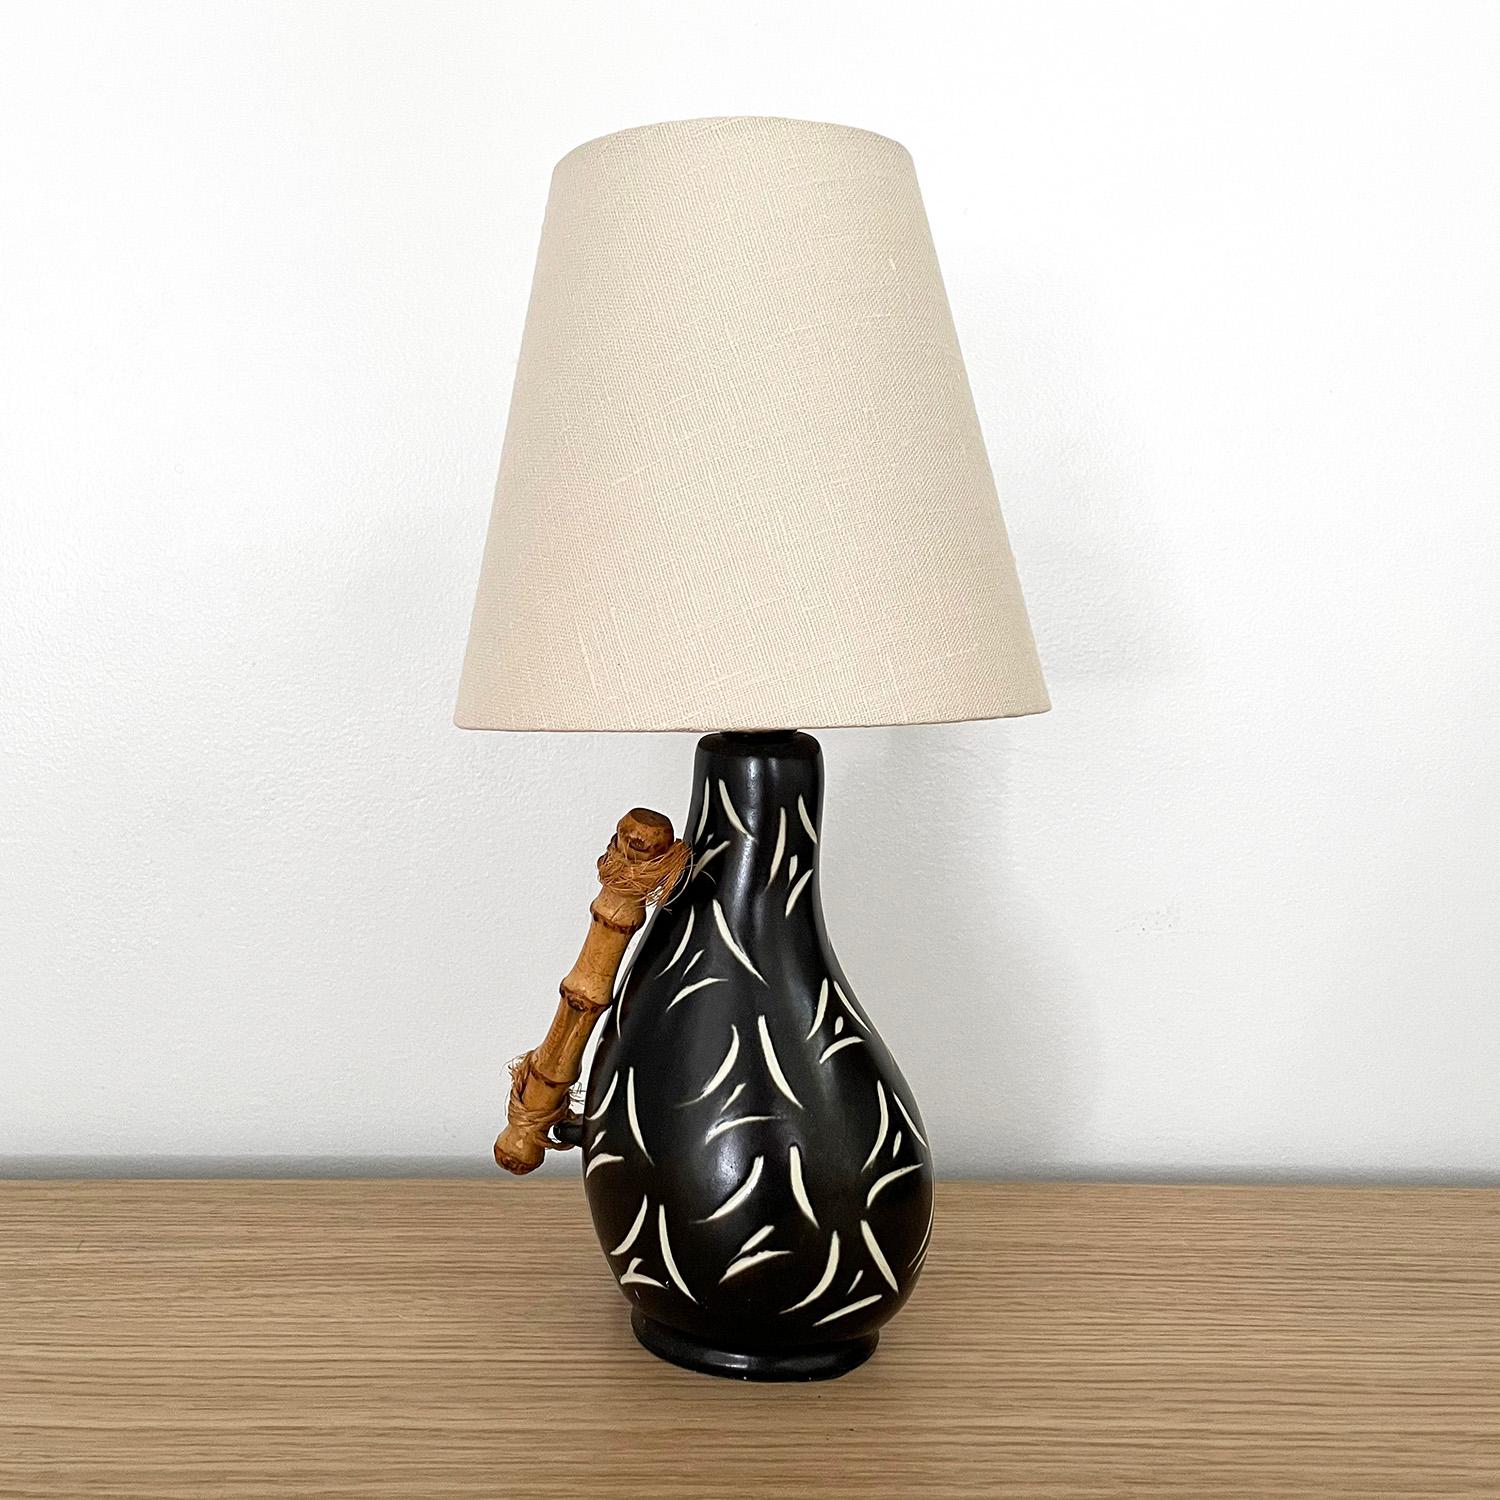 Petite ceramic table lamp with bamboo handle
Lamp base has a playful contrast pattern with light surface markings
Bamboo handle with natural woven binding
Patina from age use
Newly rewired
New linen shade
French silk twist cord
Single socket